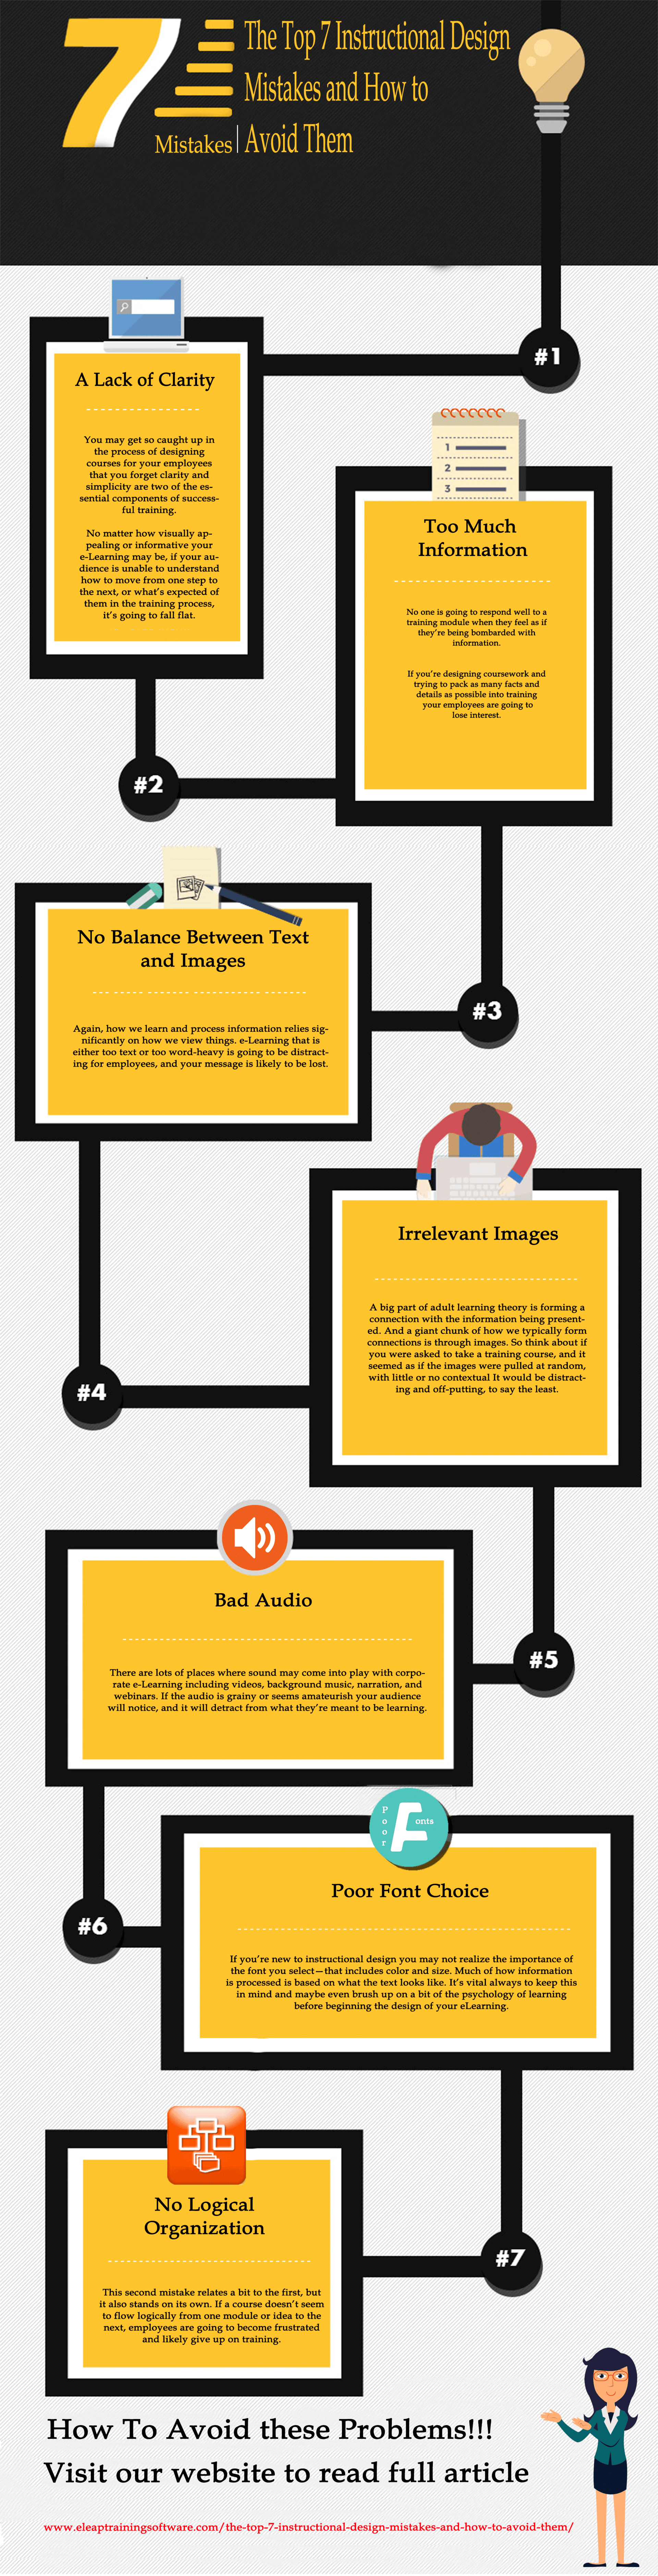 Top 7 Instructional Design Mistakes and How to Avoid Them Infographic